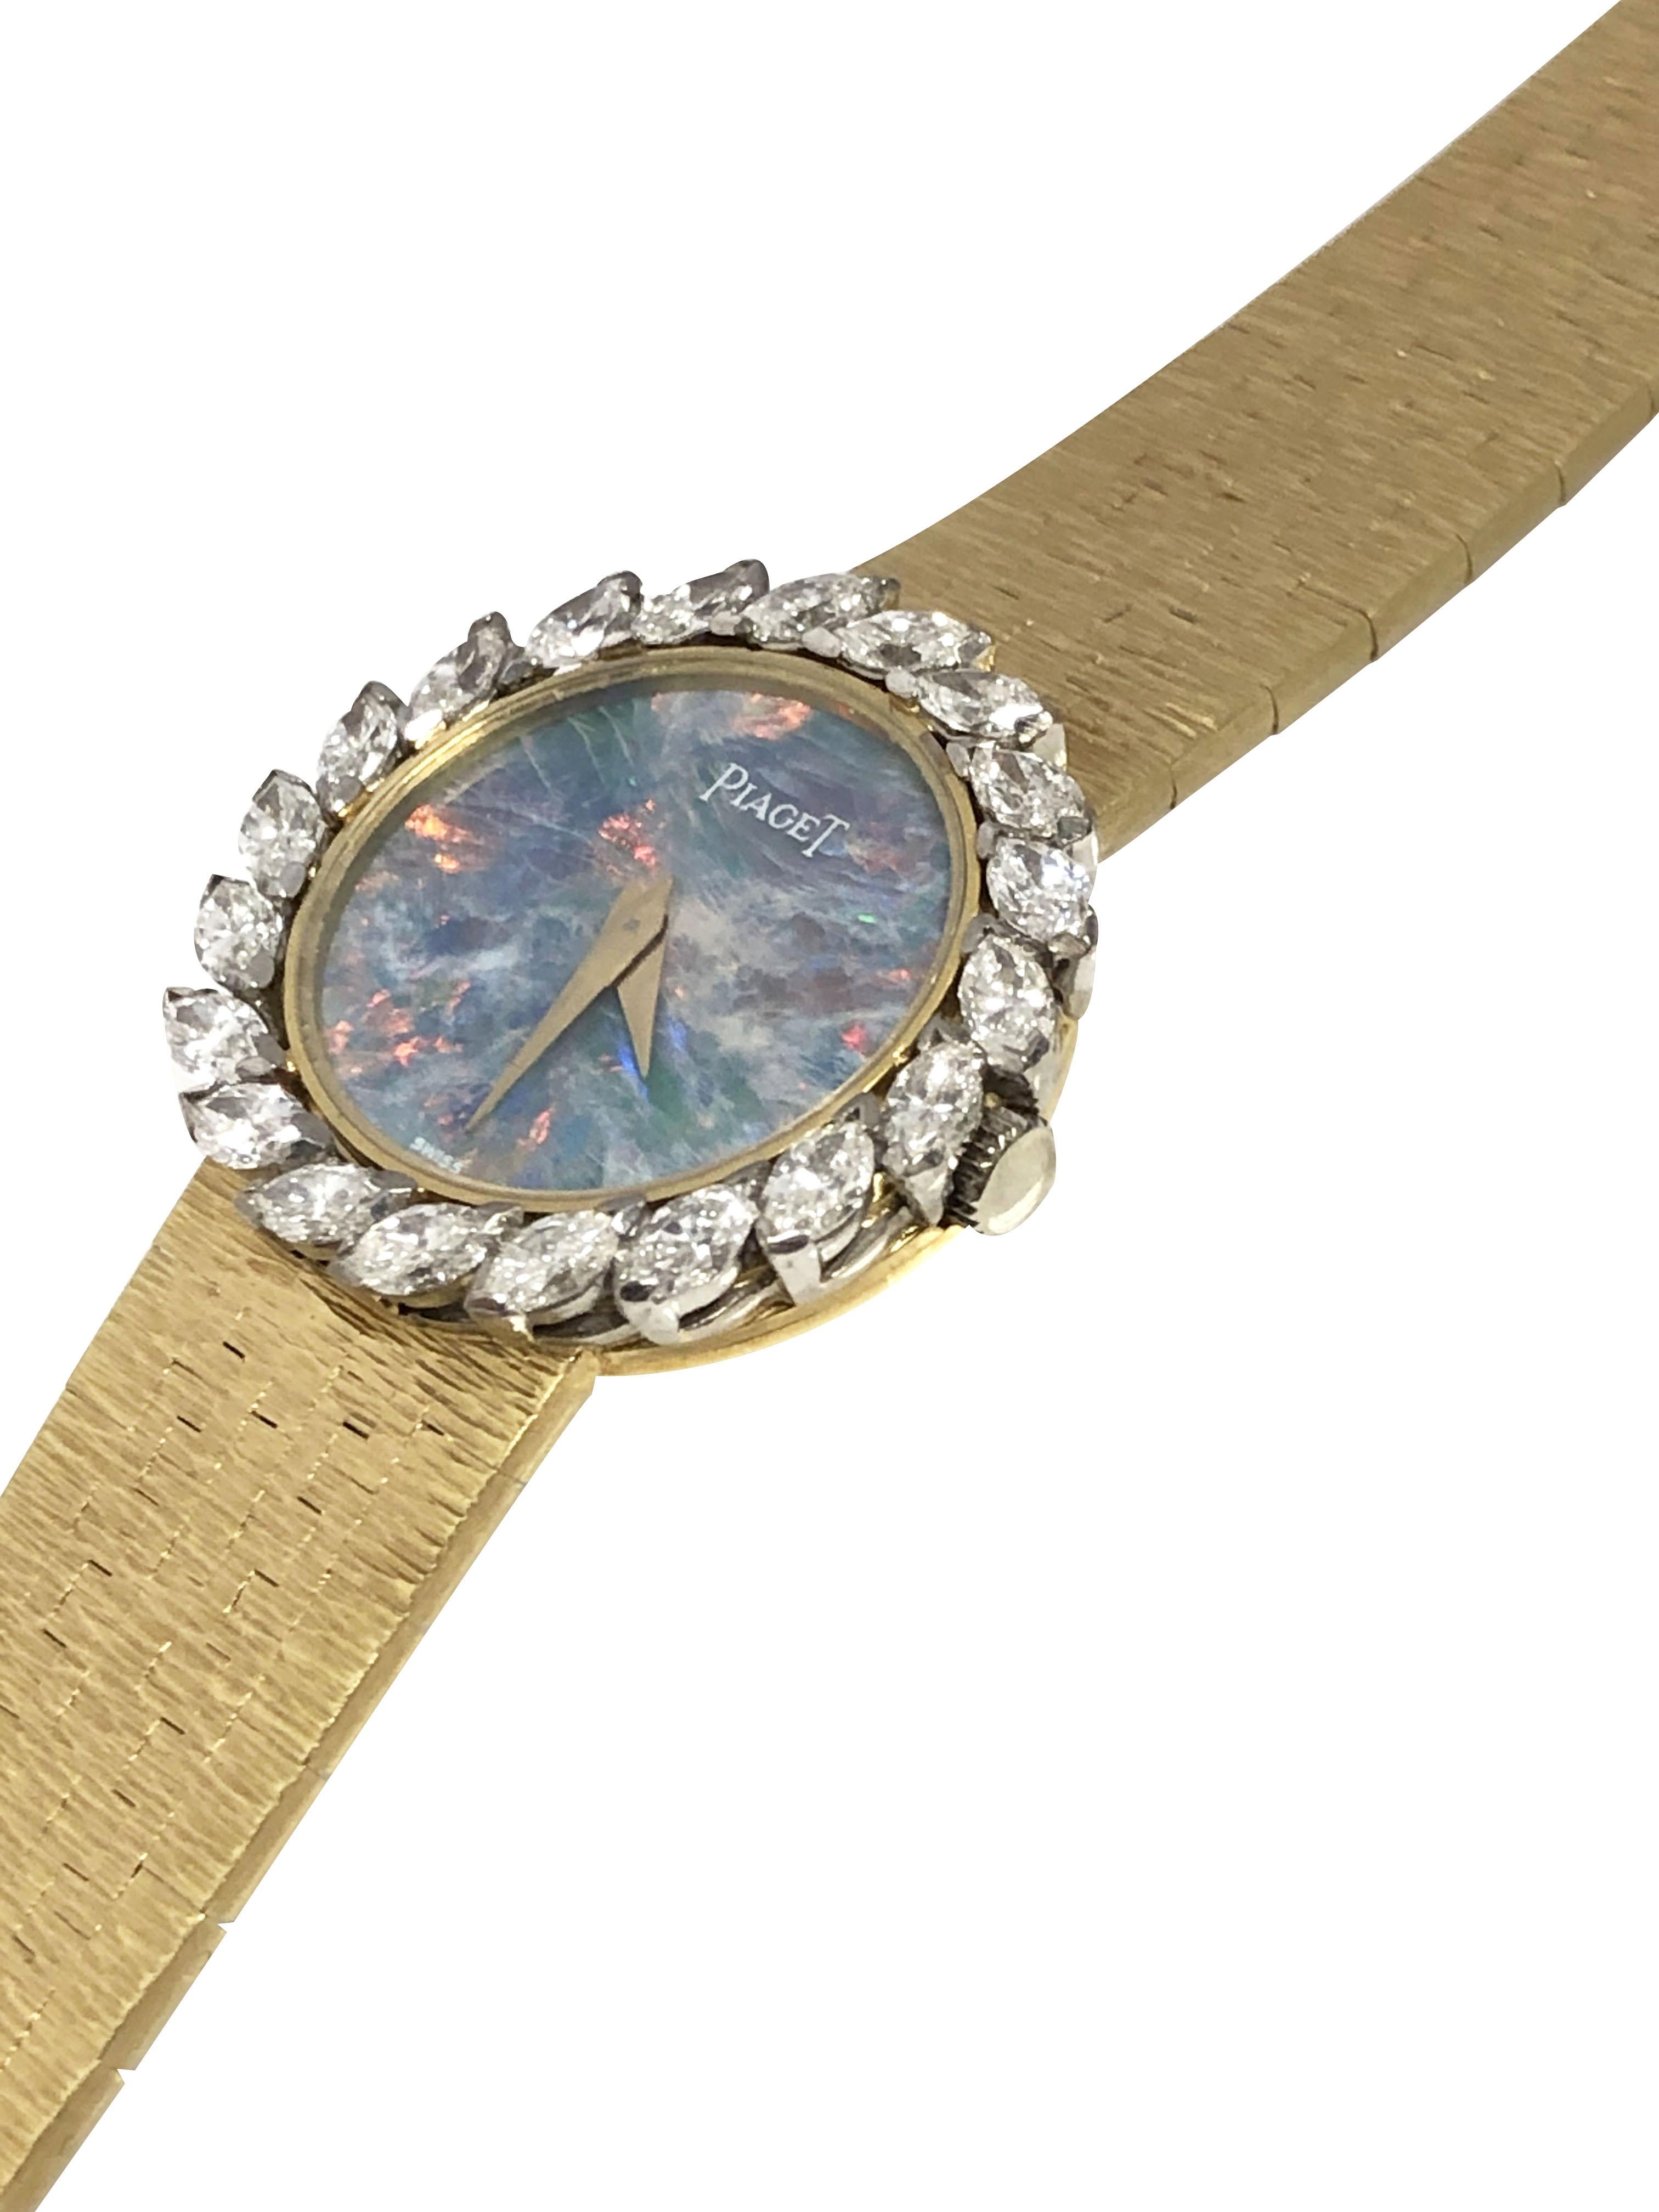 Circa 1980 Piaget Ladies Wrist Watch, 18K Yellow Gold 24 M.M. 2 piece case, bezel set with Marquise shape Diamonds totaling 1.50 Carats and Grading as G in color and VS in clarity. Firey Opal dial with bold colors of Blue, Red and Green. 17 Jewel